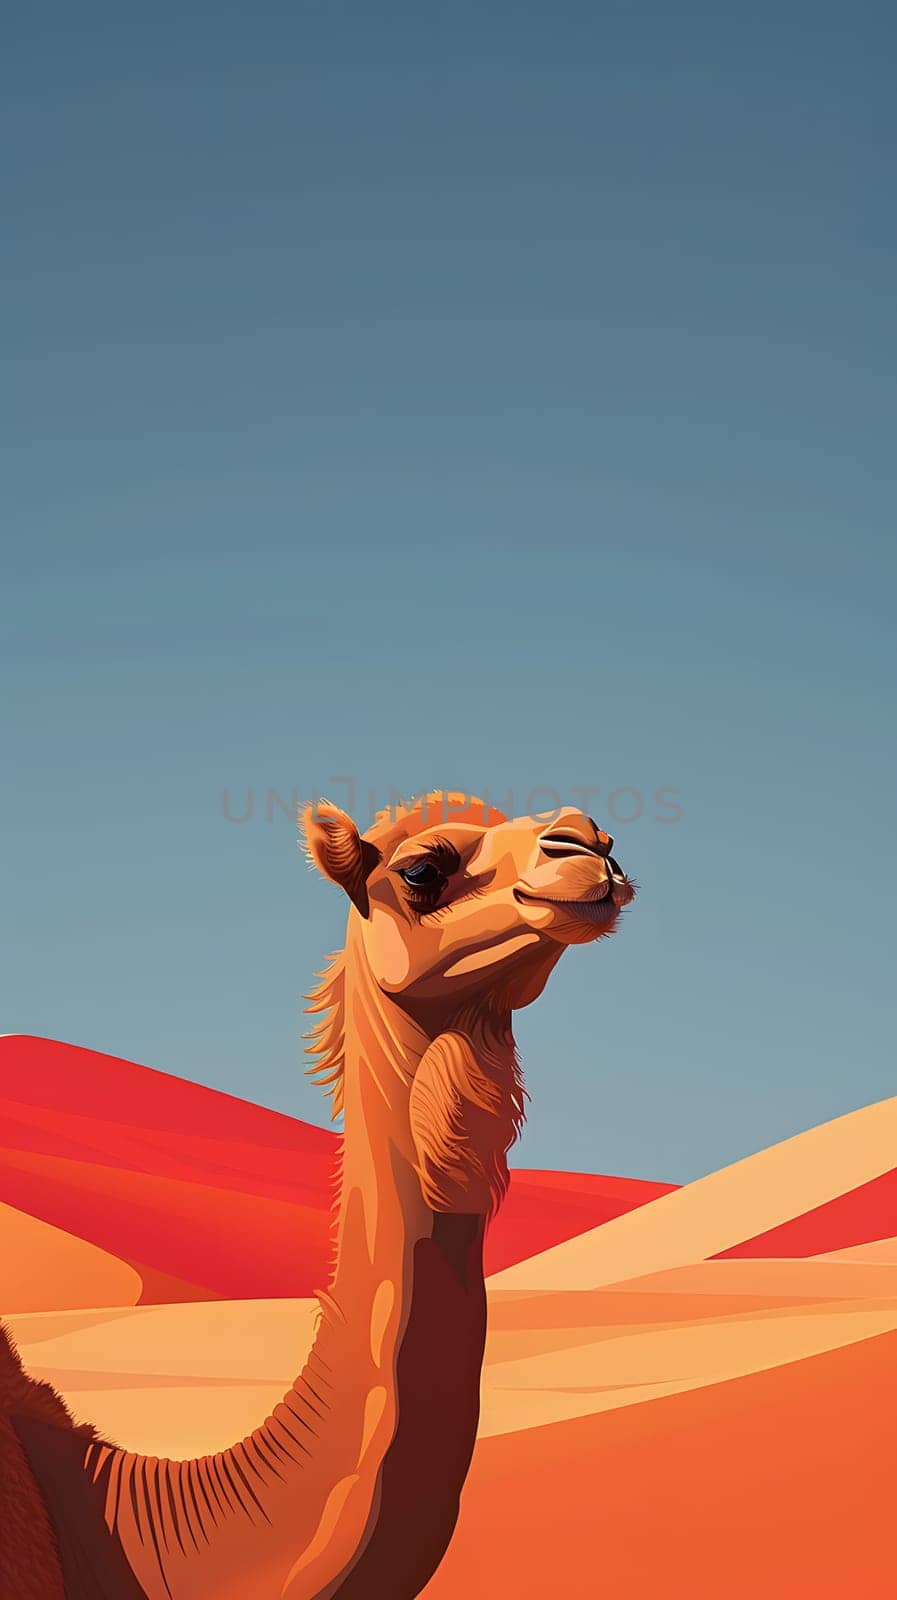 A happy Arabian camel stands tall in the vast desert landscape, its elegant gestures reflecting its status as a terrestrial animal of the Camelid family